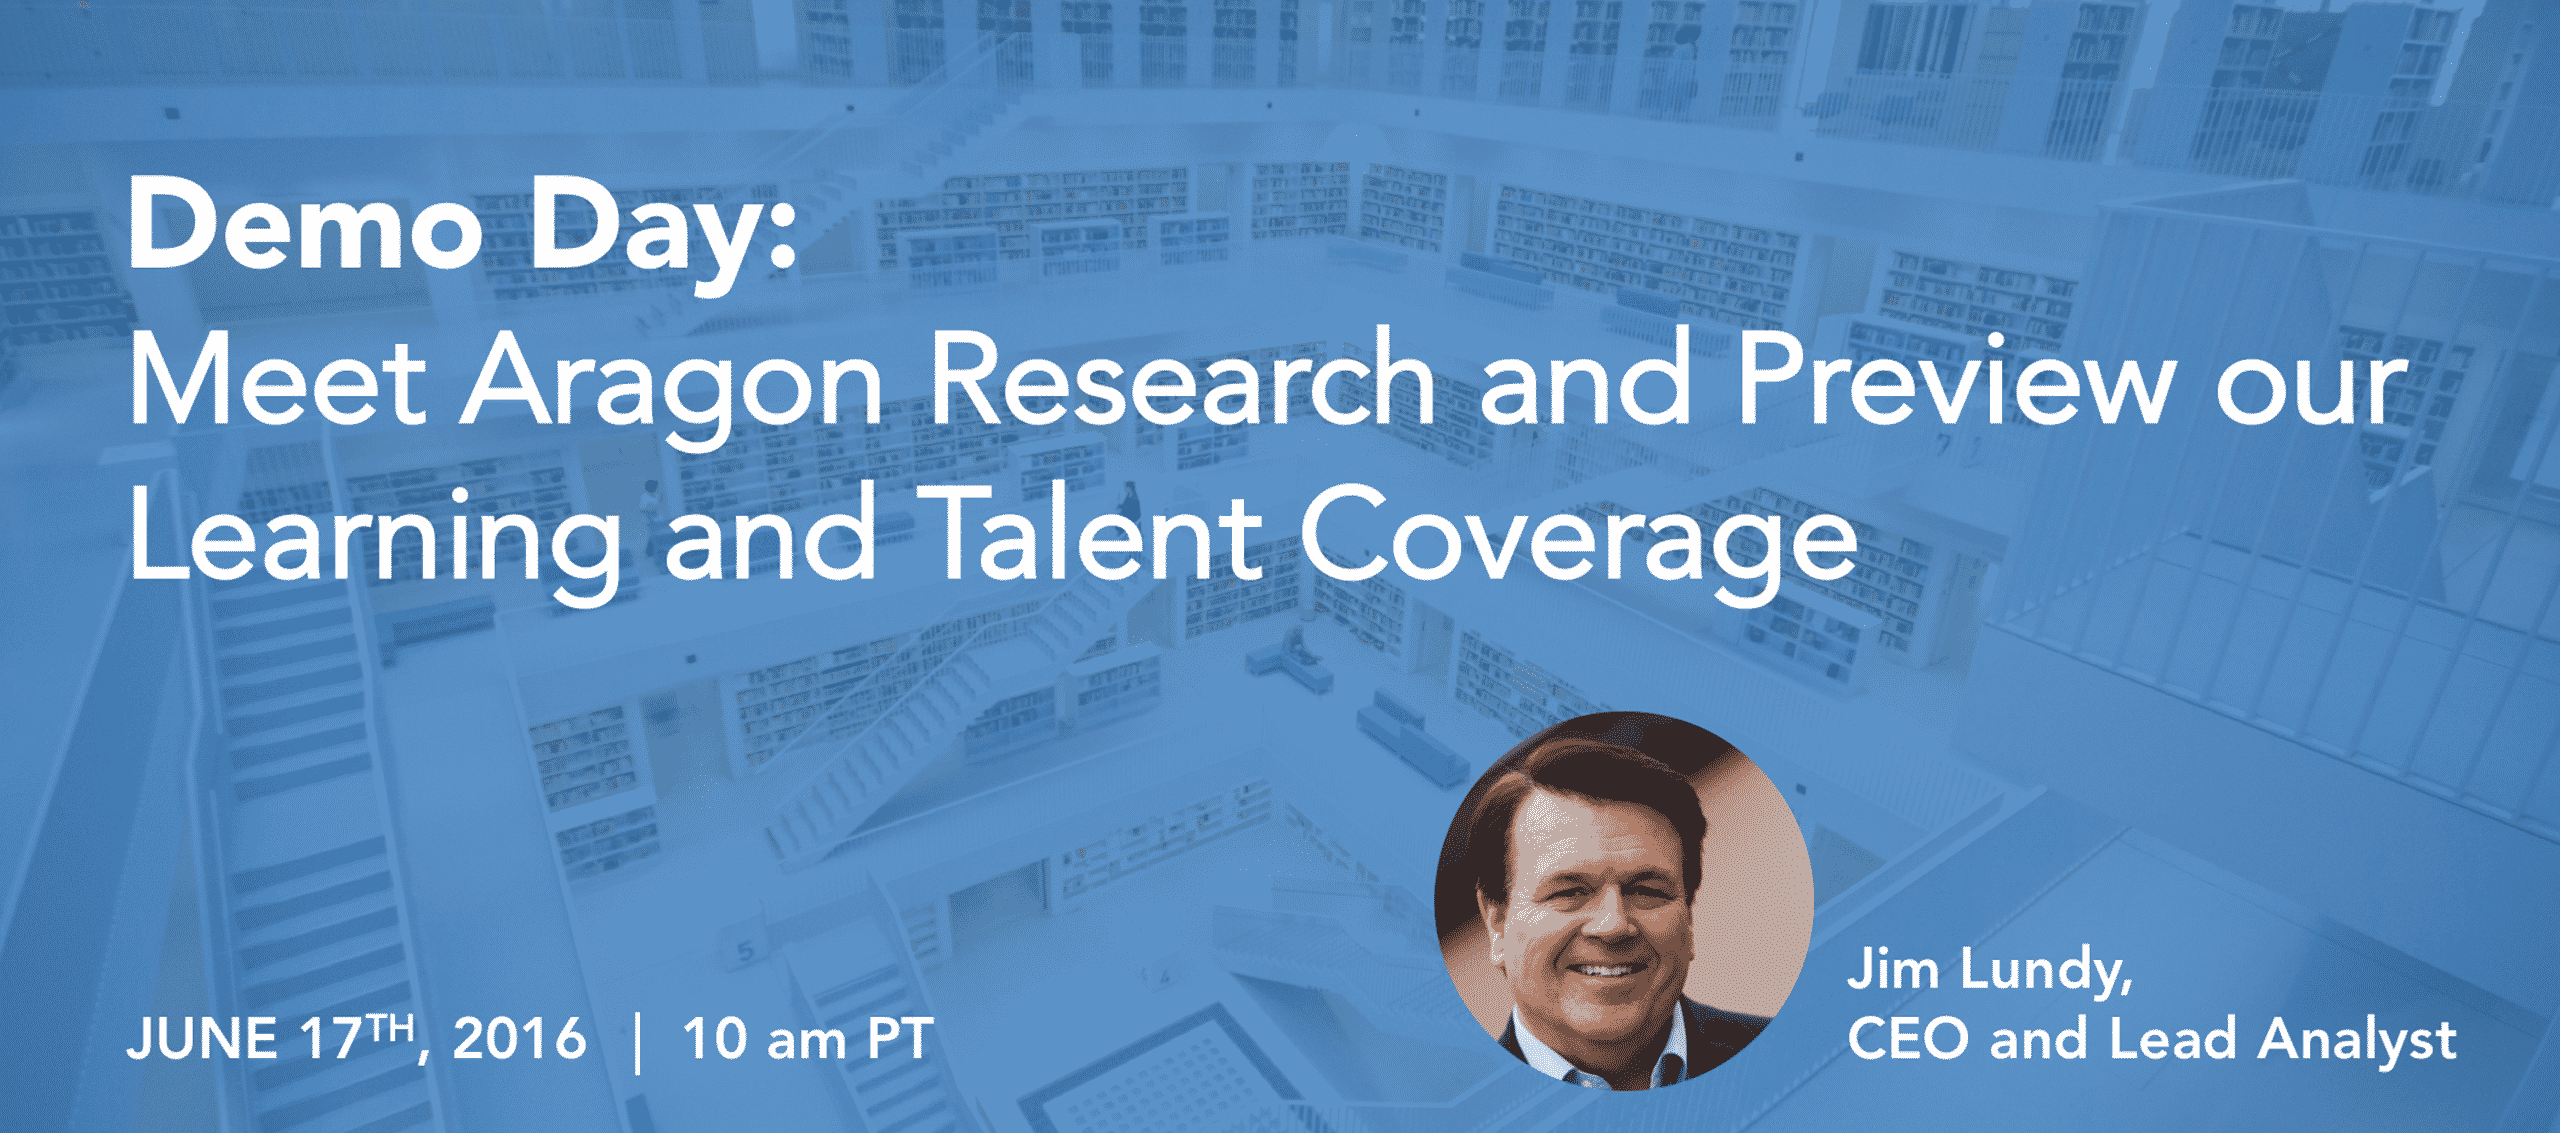 Demo Day Preview our Learning and Talent Coverage on June17th at 10 am PT - Talent Management - Aragon Research